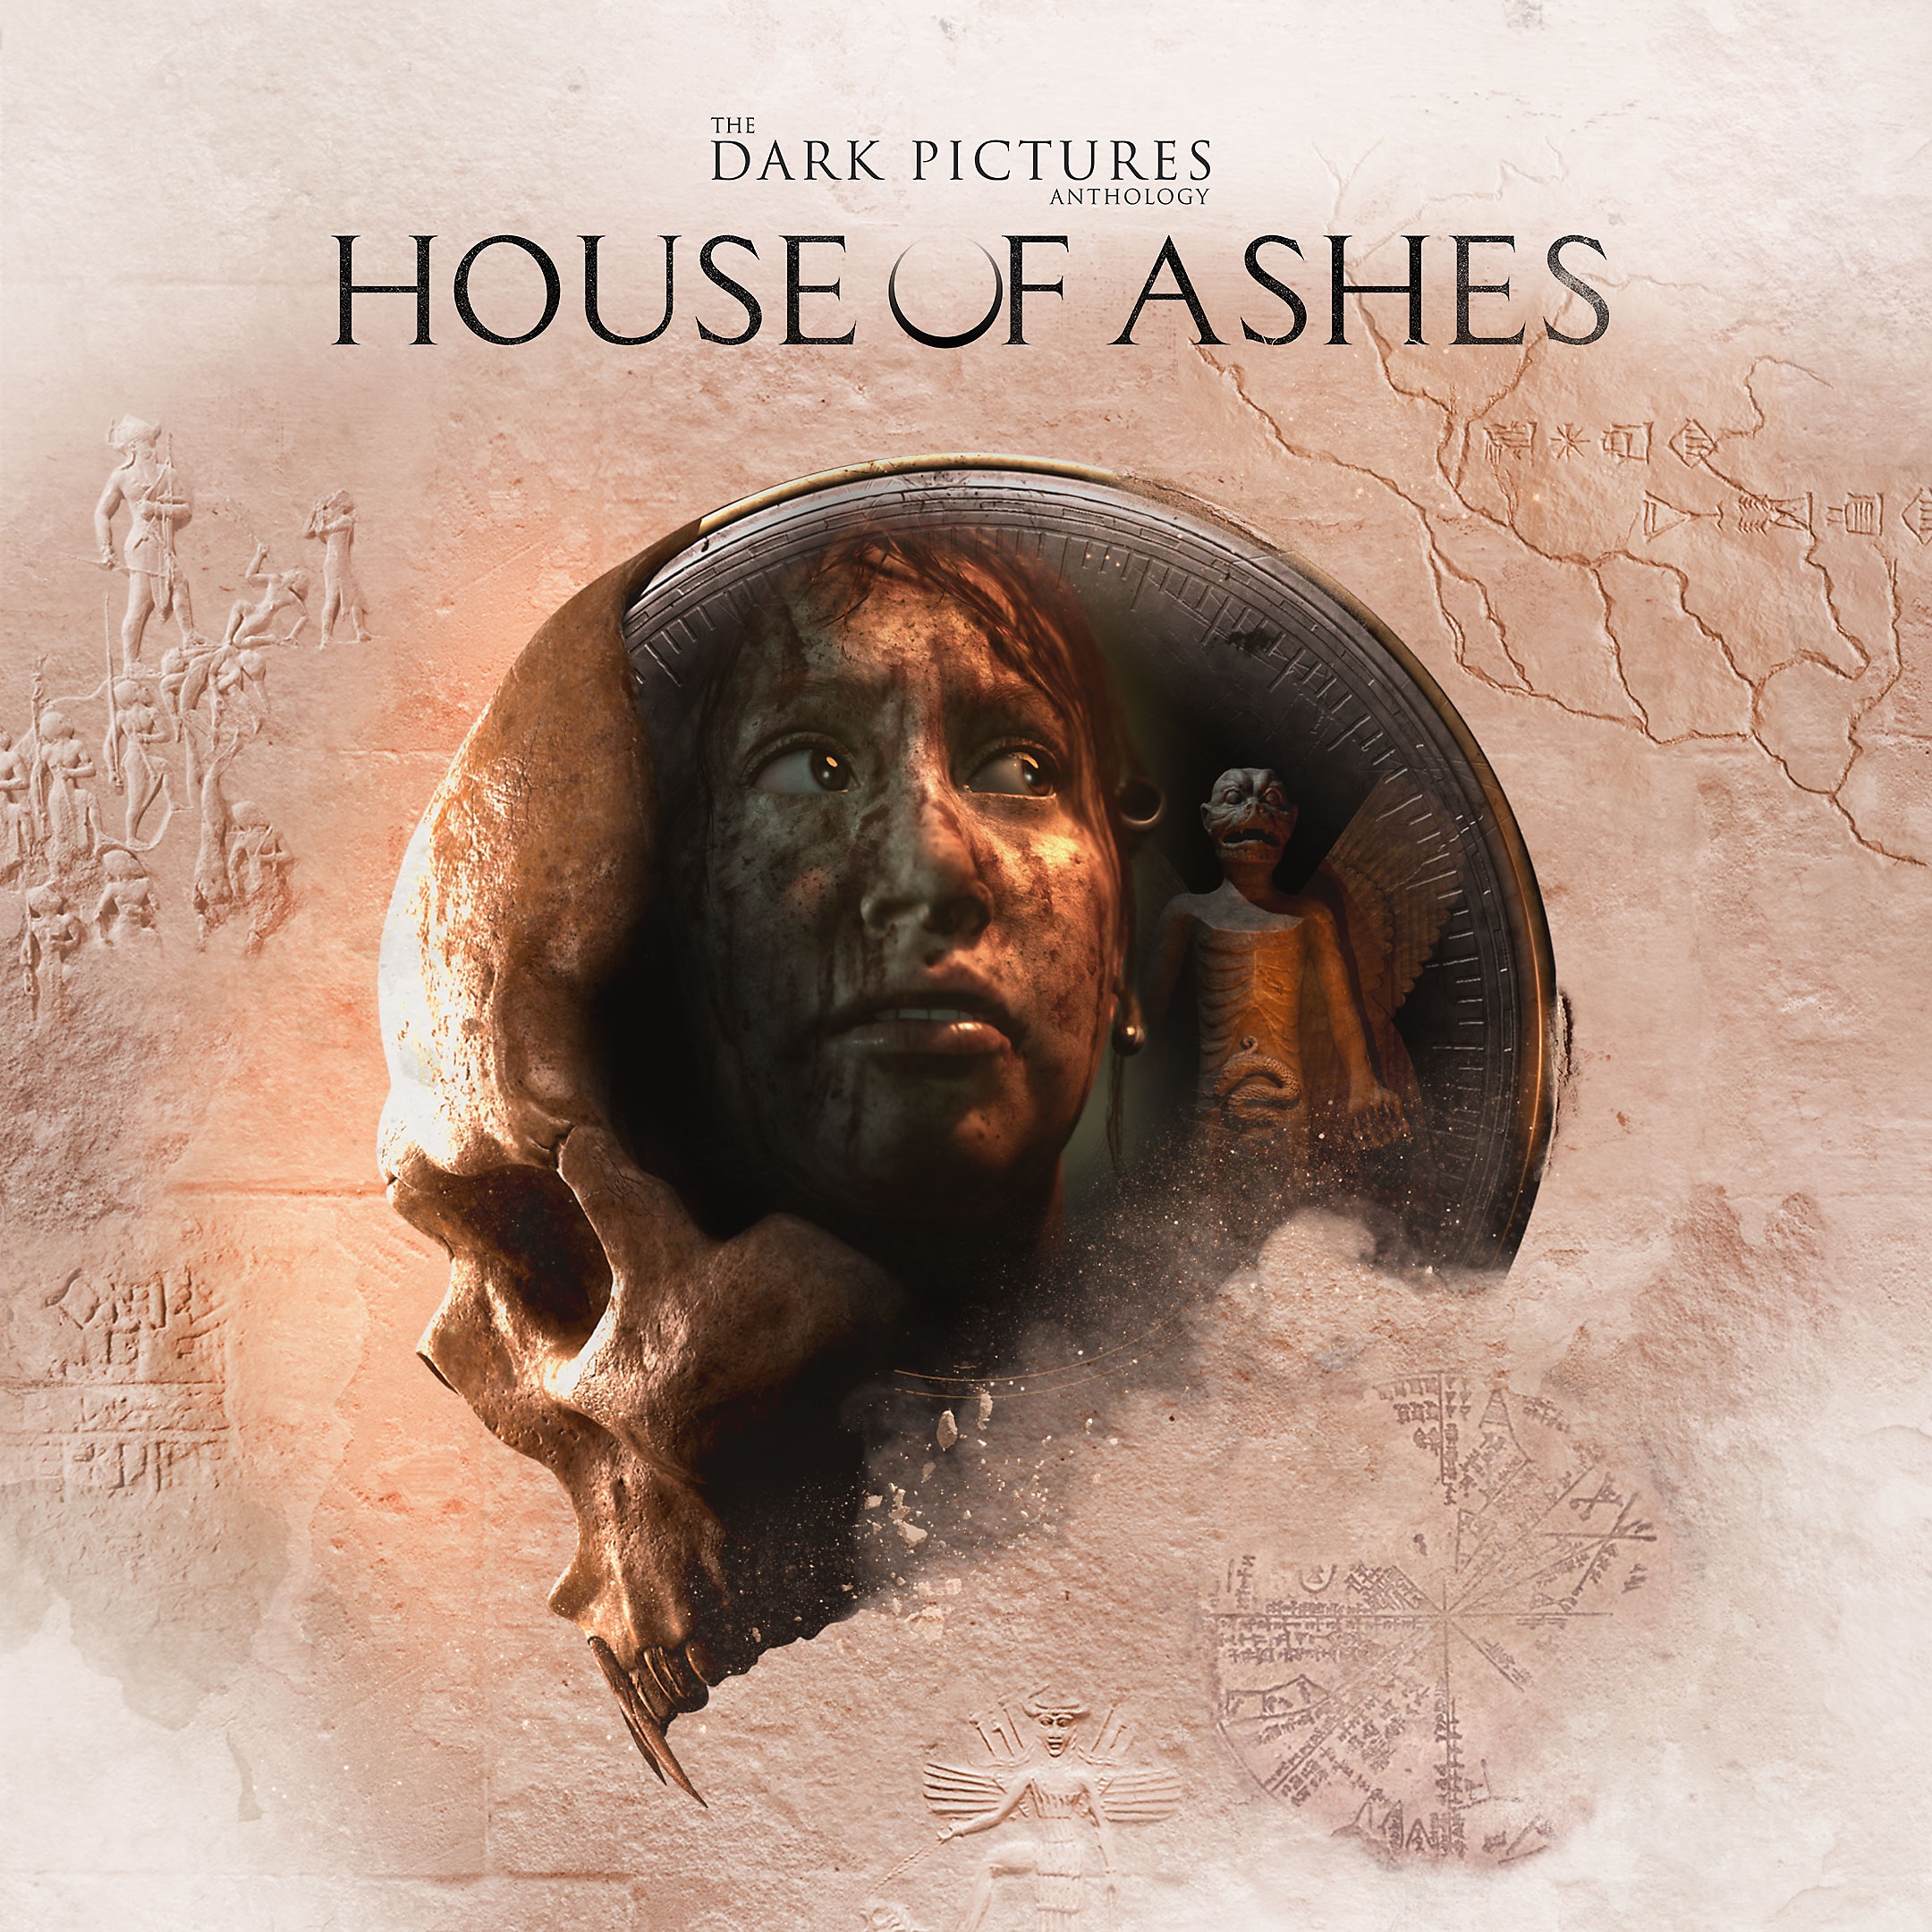 The Dark Pictures Antholoy: Ilustración comercial de House of Ashes